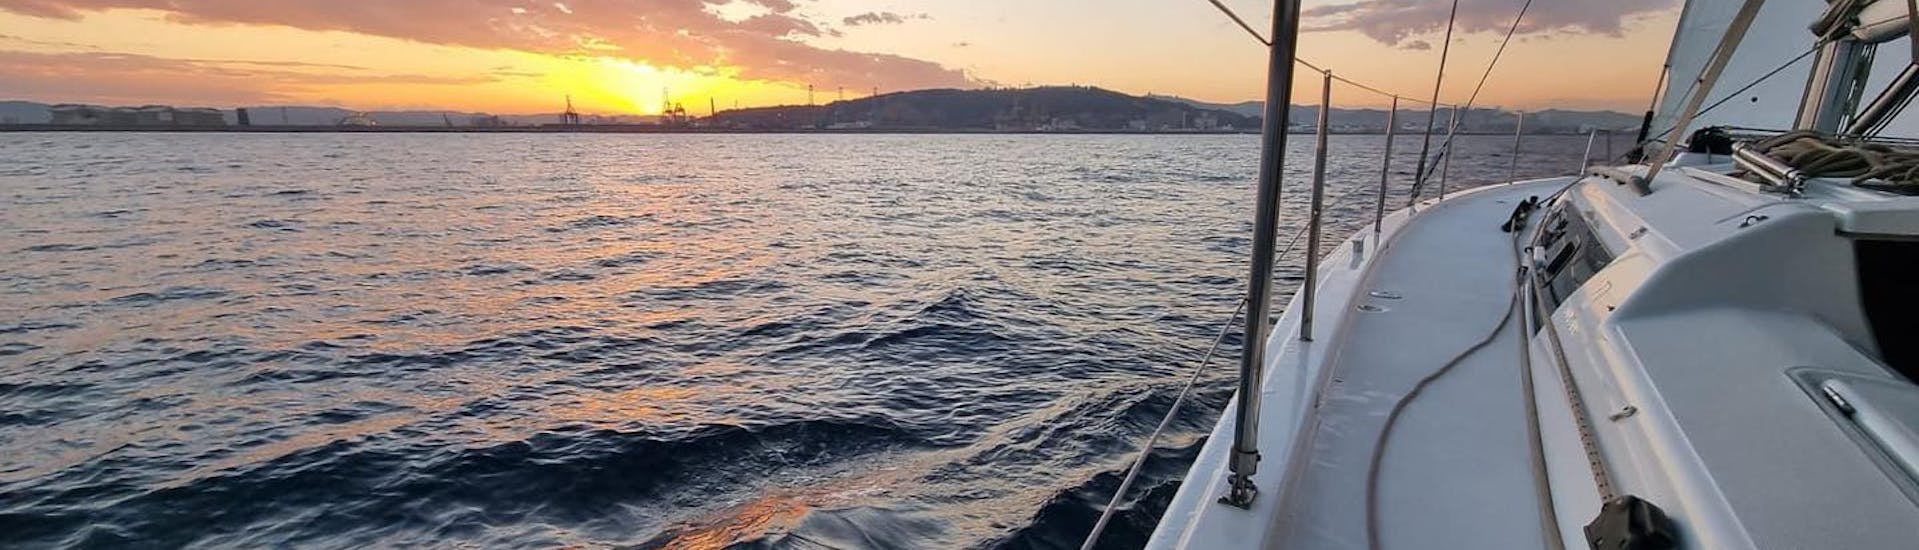 The sailboat is navigating under the sunset during the Sunset Yacht Trip from Palma de Mallorca with Open Bar, SUP & Snorkeling with SeaBarcelona - Sailing Balearic.